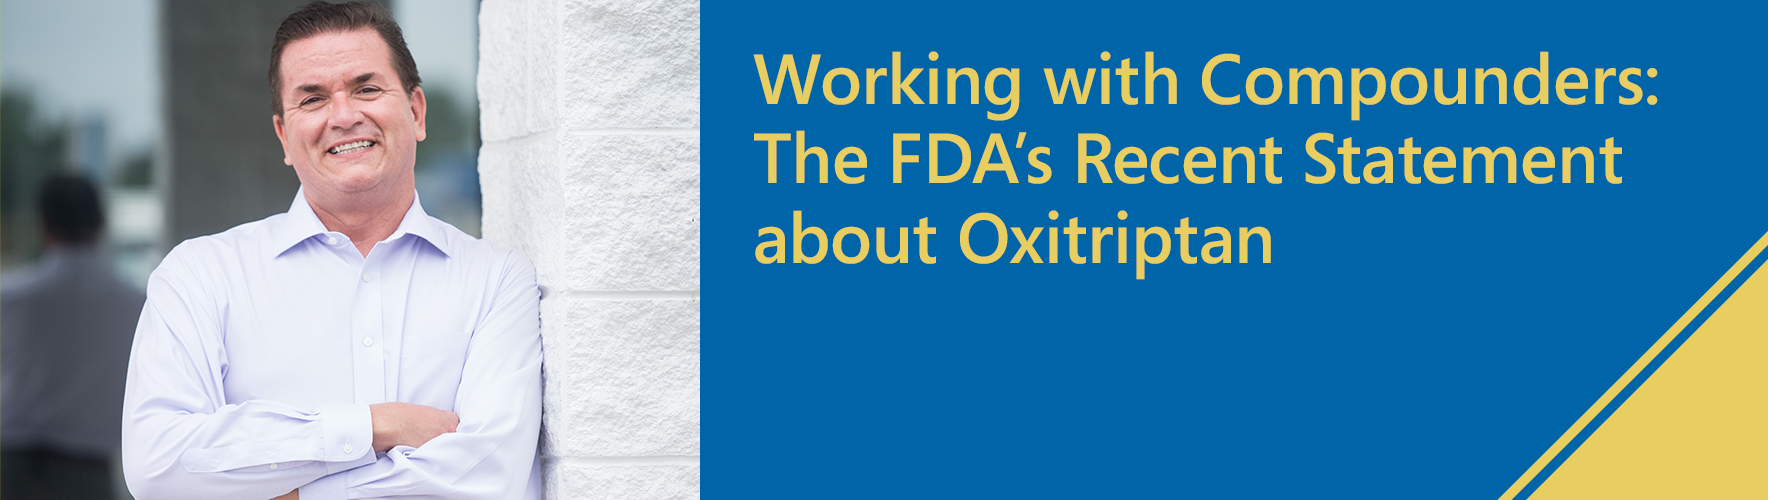 Working_with_Compounders_The_FDAs_Recent_Statement_about_Oxitriptan.png